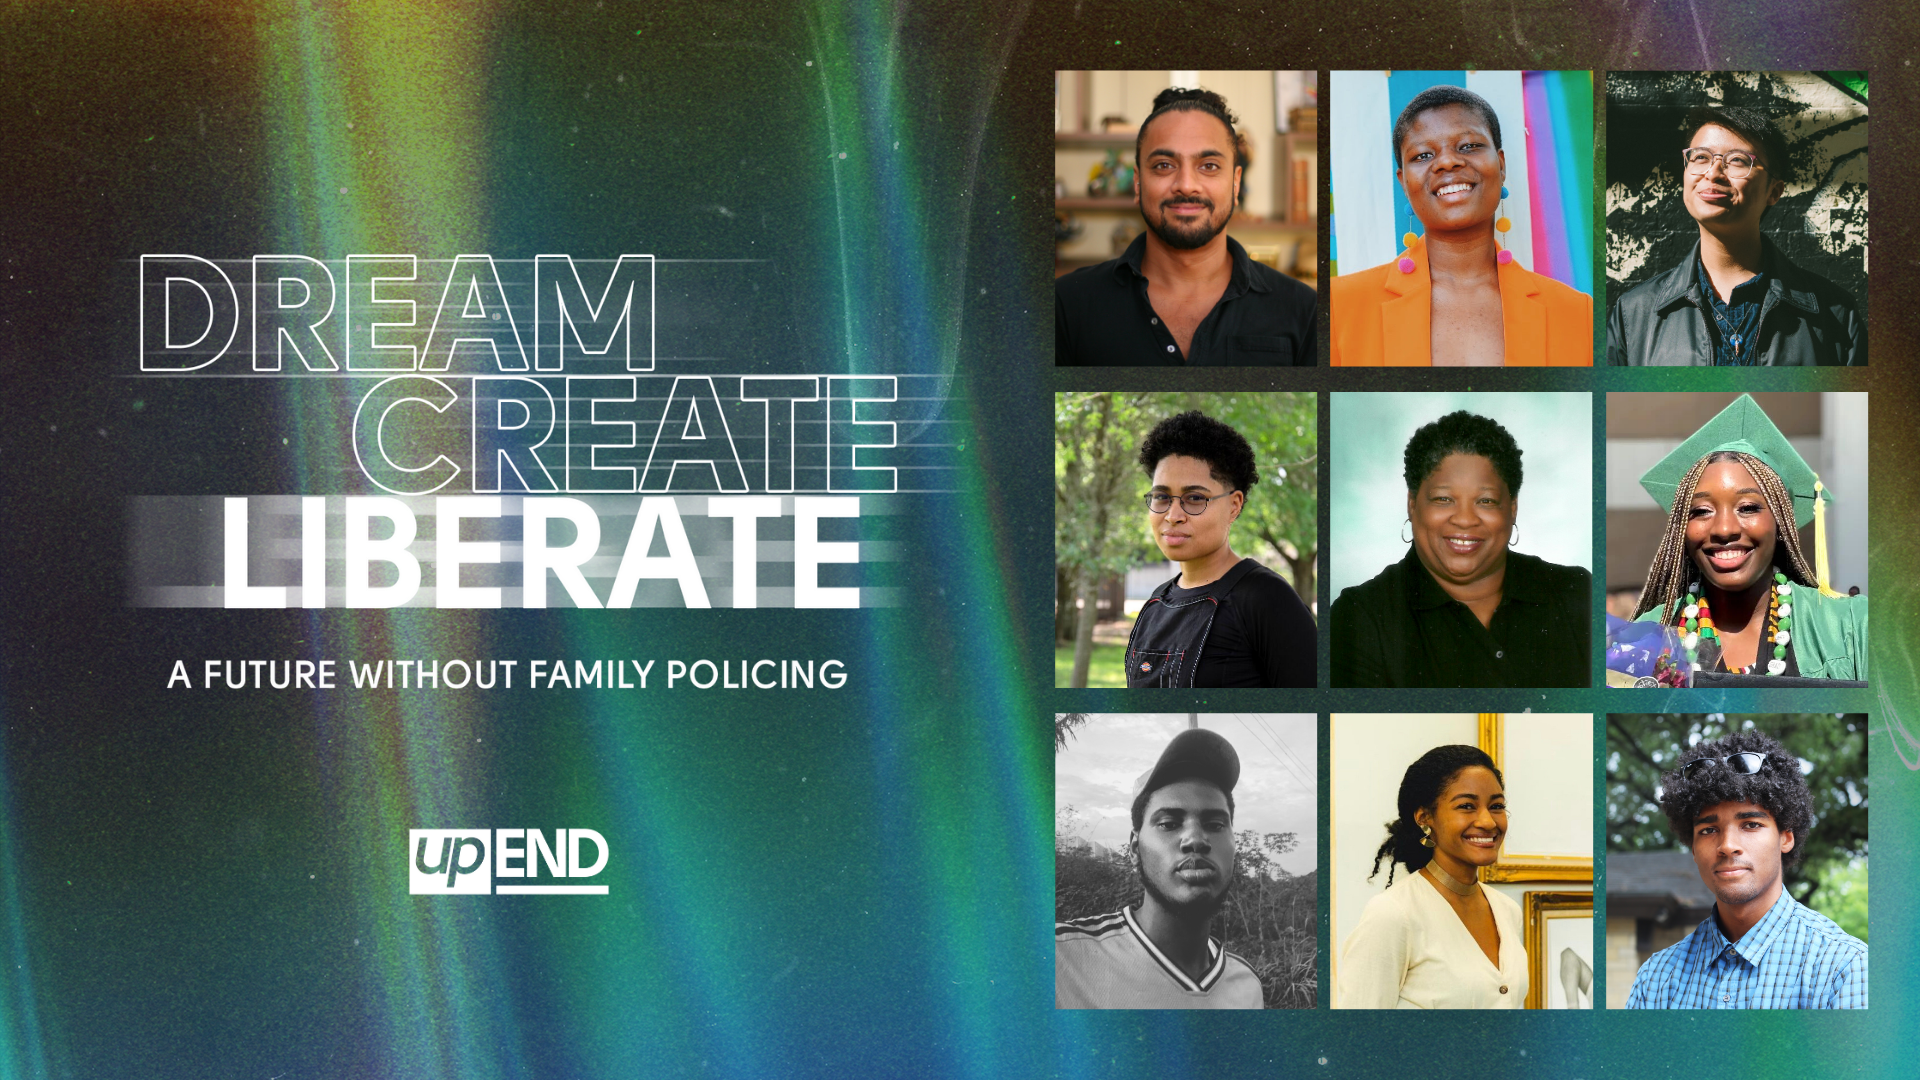 Dream Create Liberate title is accompanied by a grid of photos of the winning artists.